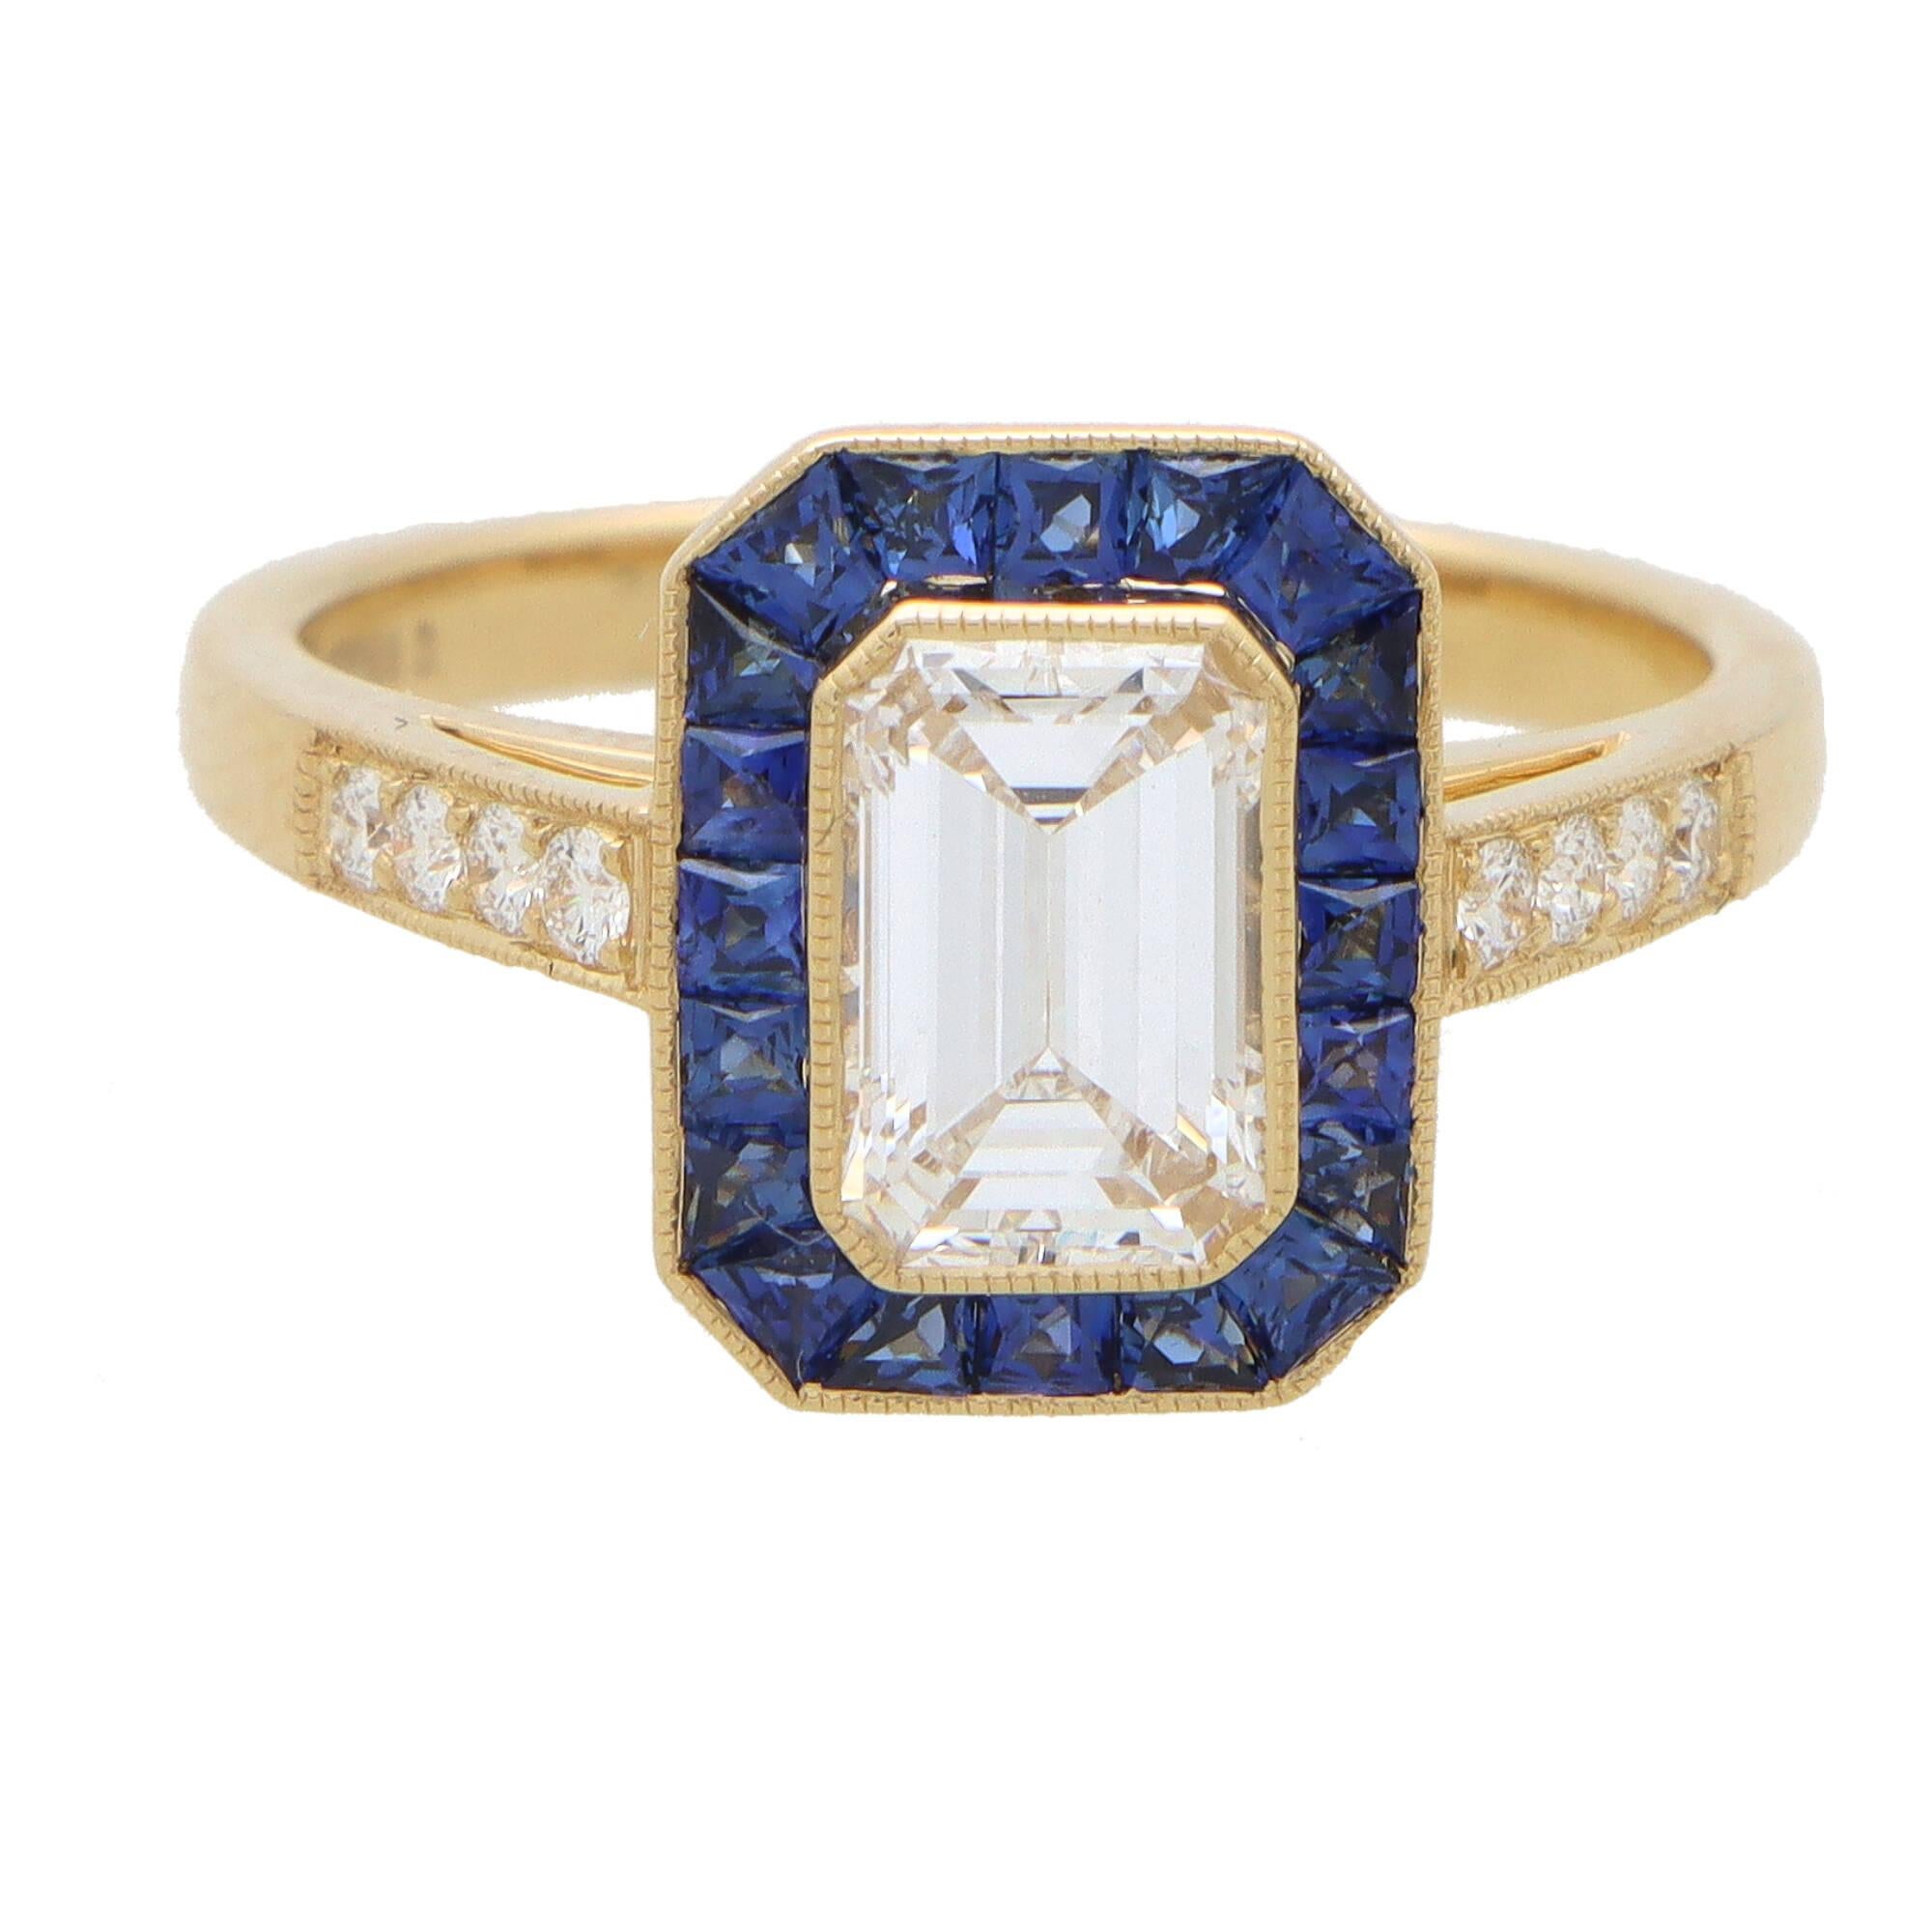 Emerald Cut Art Deco Style GIA D-Colored Diamond and Sapphire Target Ring in 18k Yellow Gold For Sale